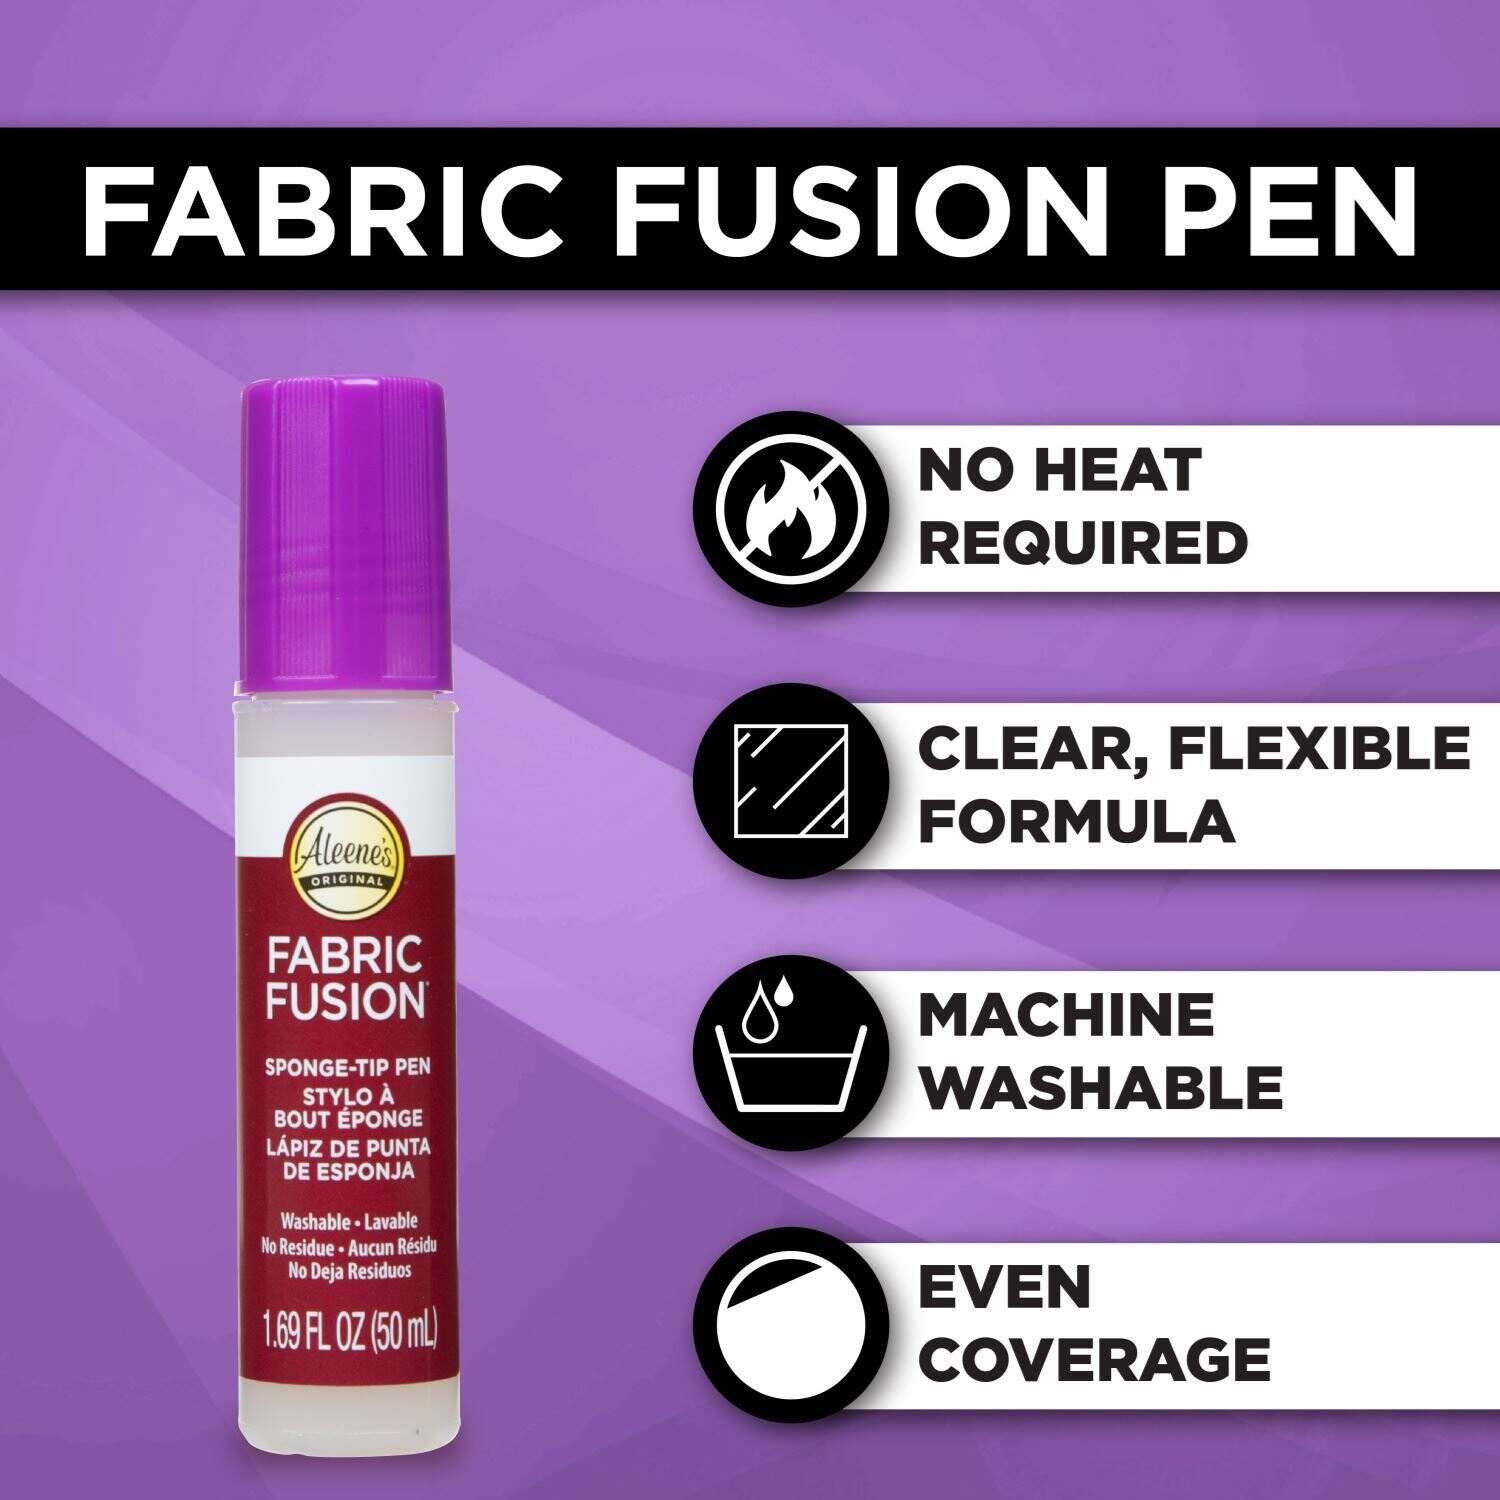 Helpful Tips for using Aleene's Fabric Fusion 